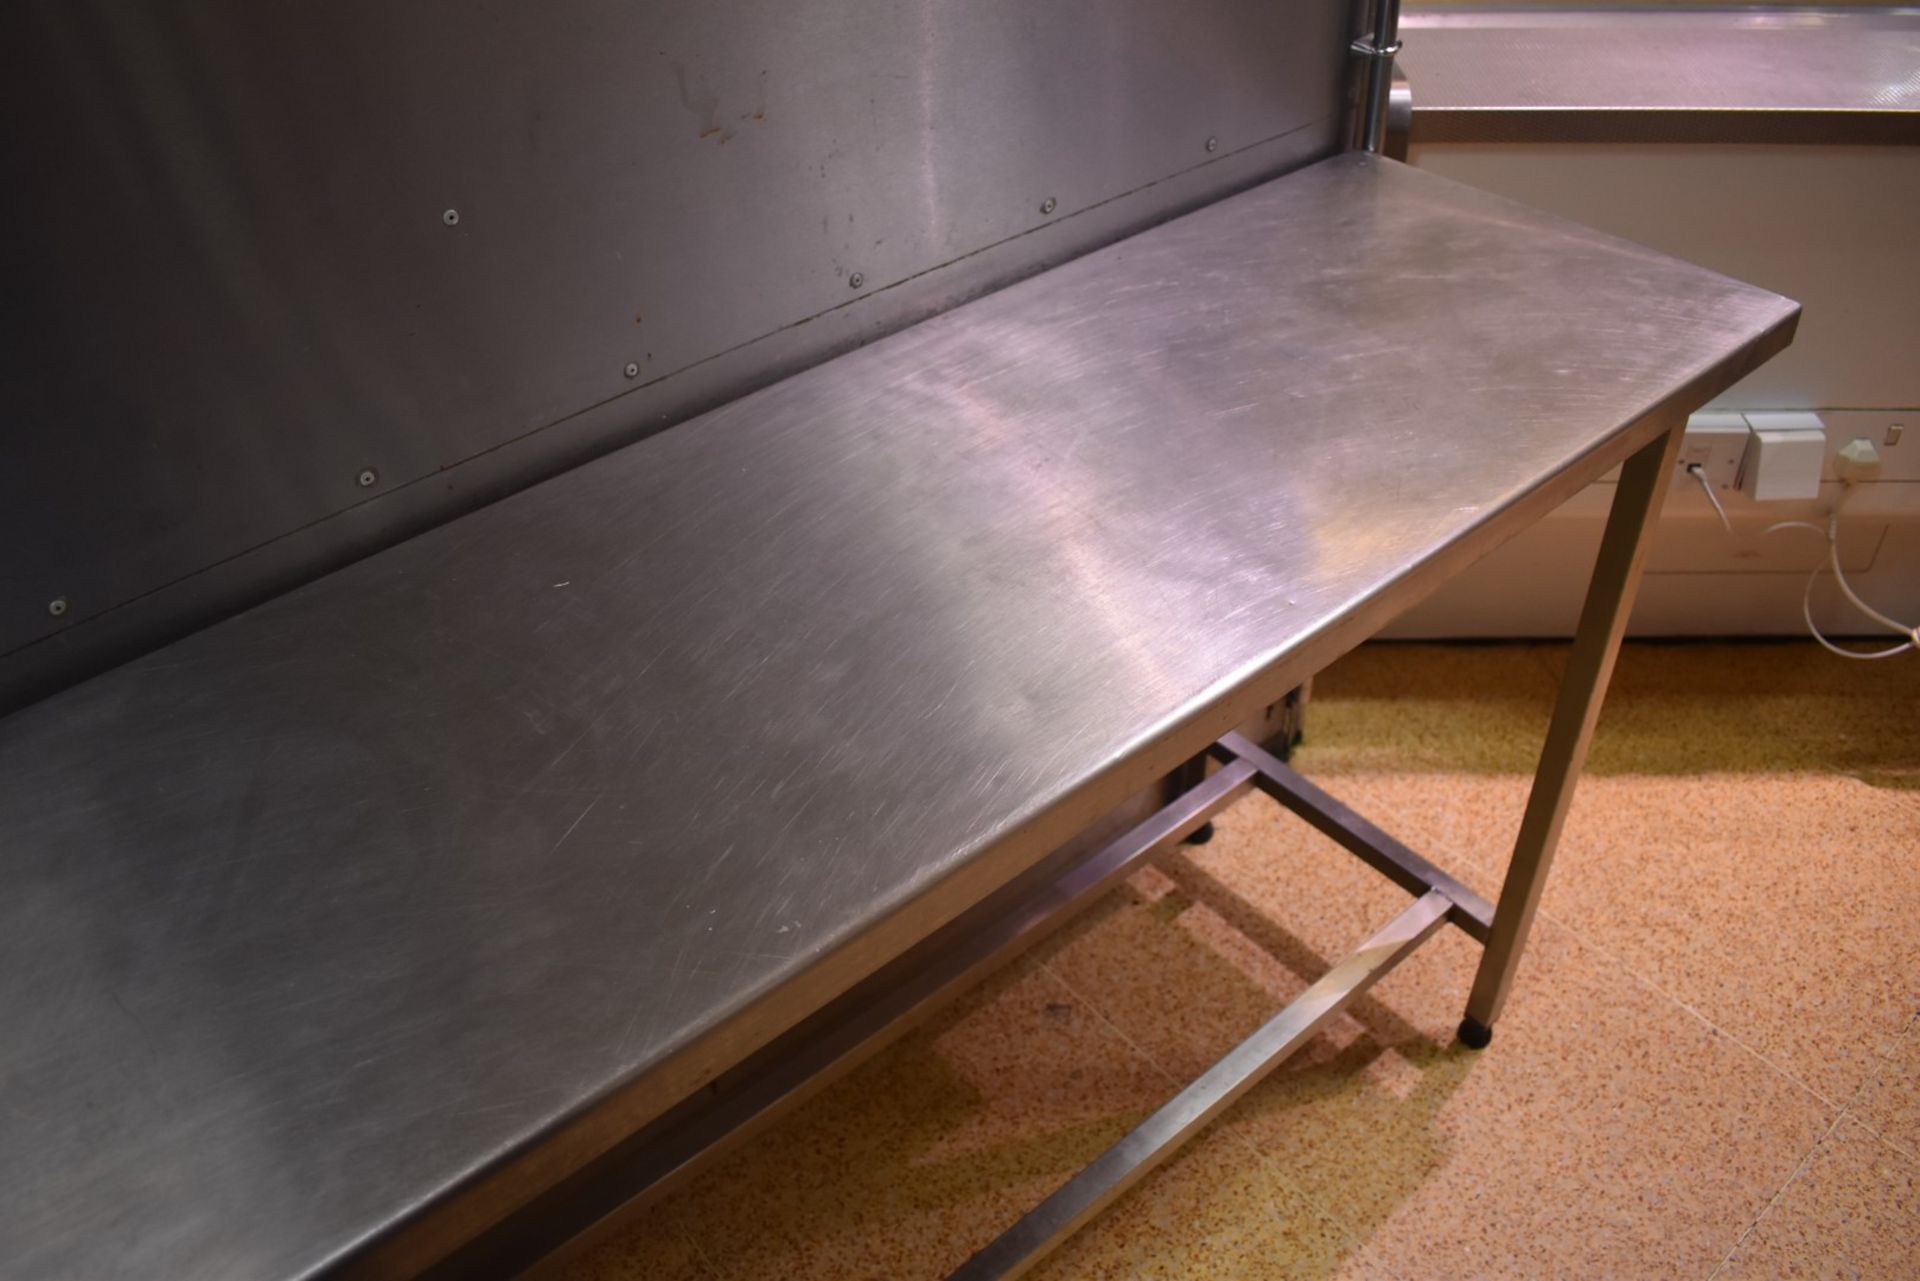 1 x Stainless Steel Prep Table - H85 x W184 x D46 cms - CL455 - Ref CB212 - Location: Altrincham - Image 3 of 3